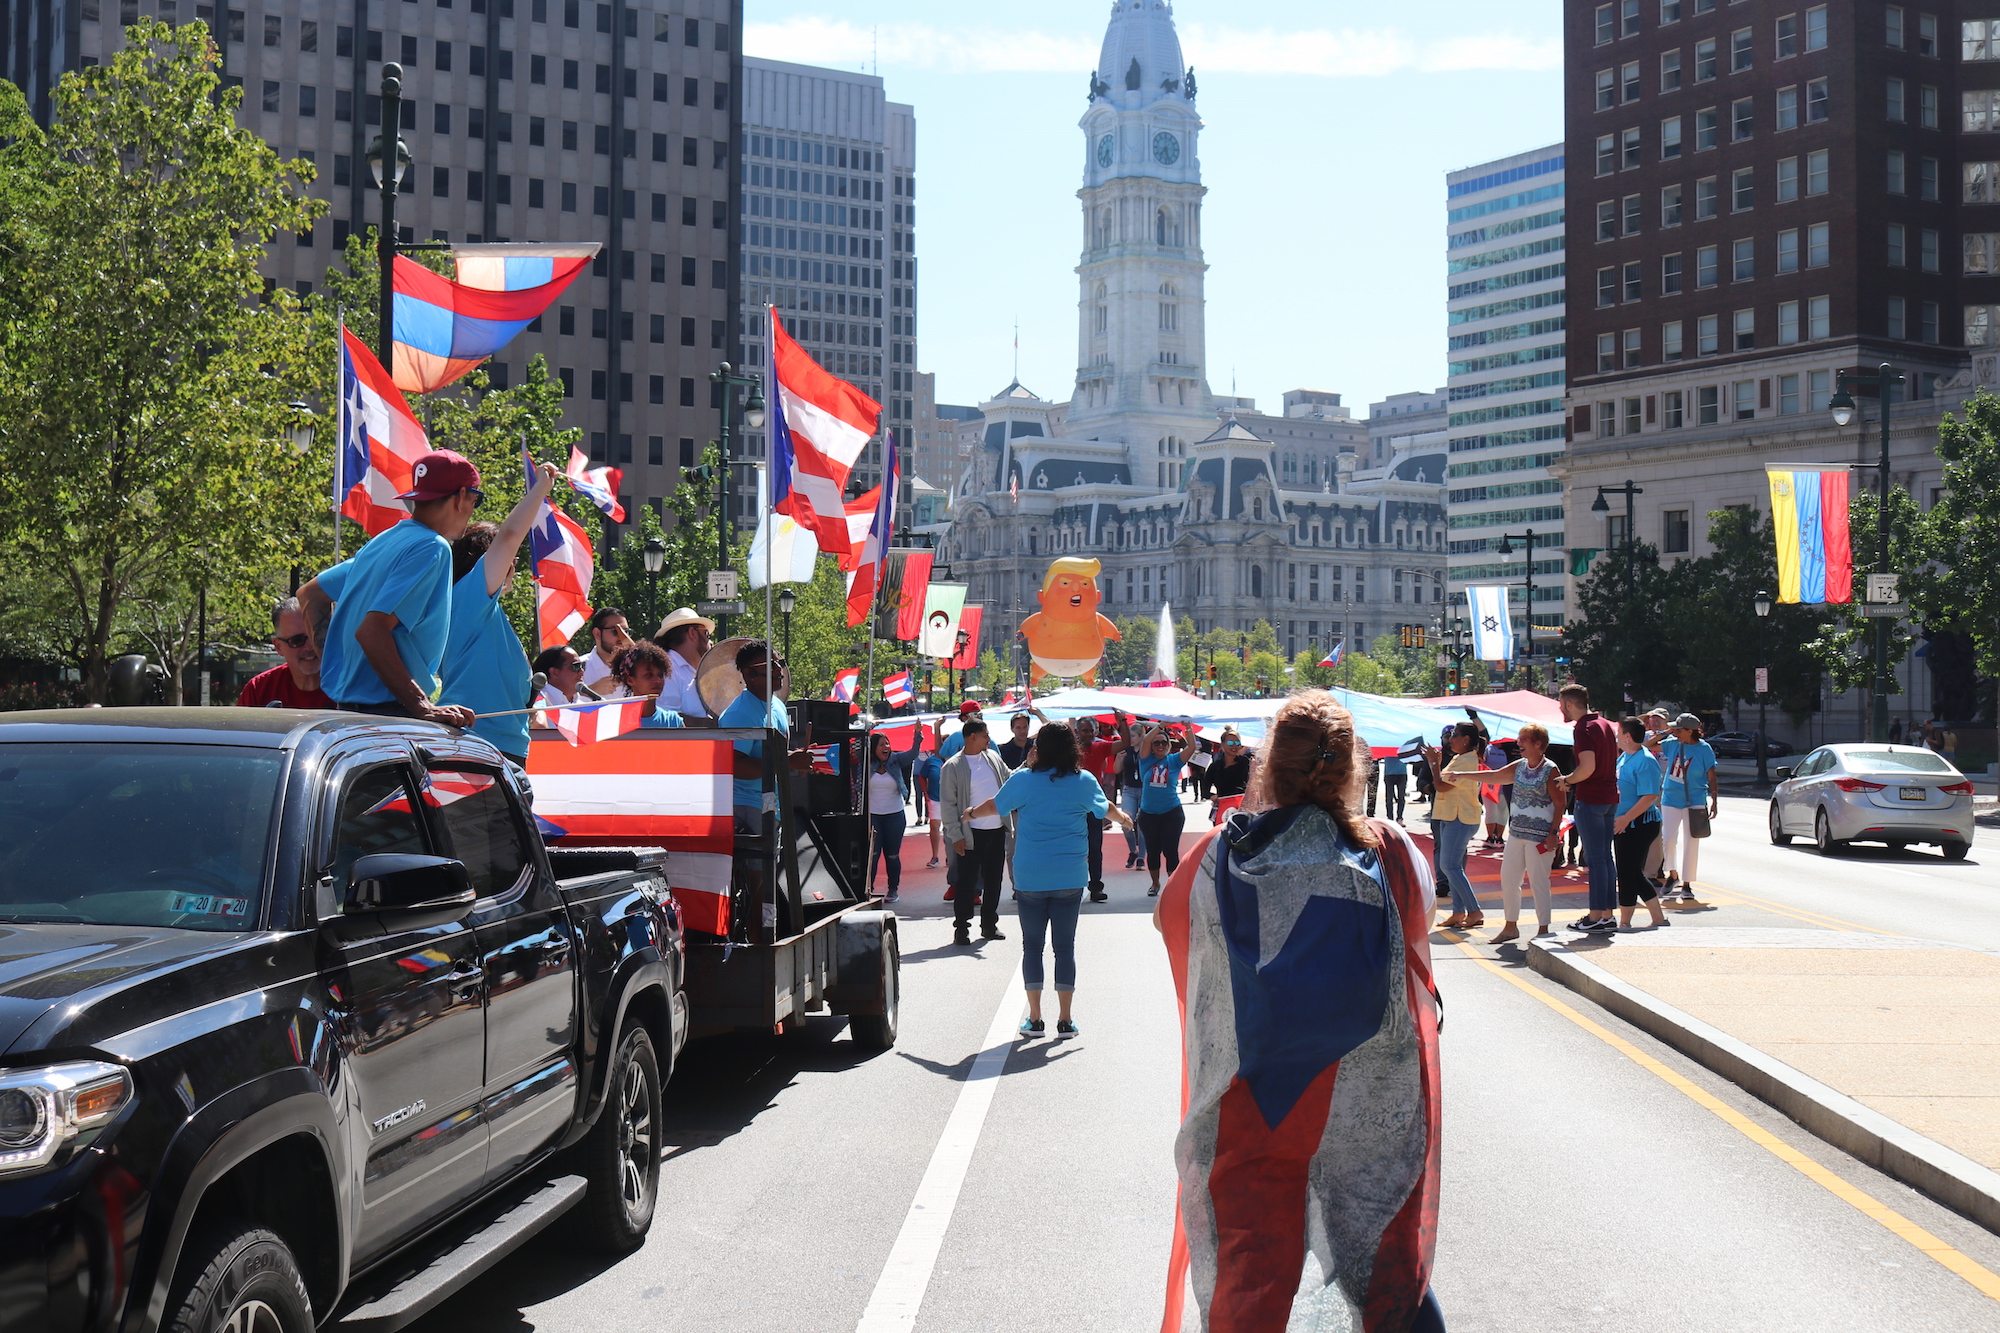 Hundreds marched down the parkway in a show of empowerment for Puerto Ricans on the mainland U.S. and on the island on September 21. Photo: Nigel Thompson/AL DÍA News.